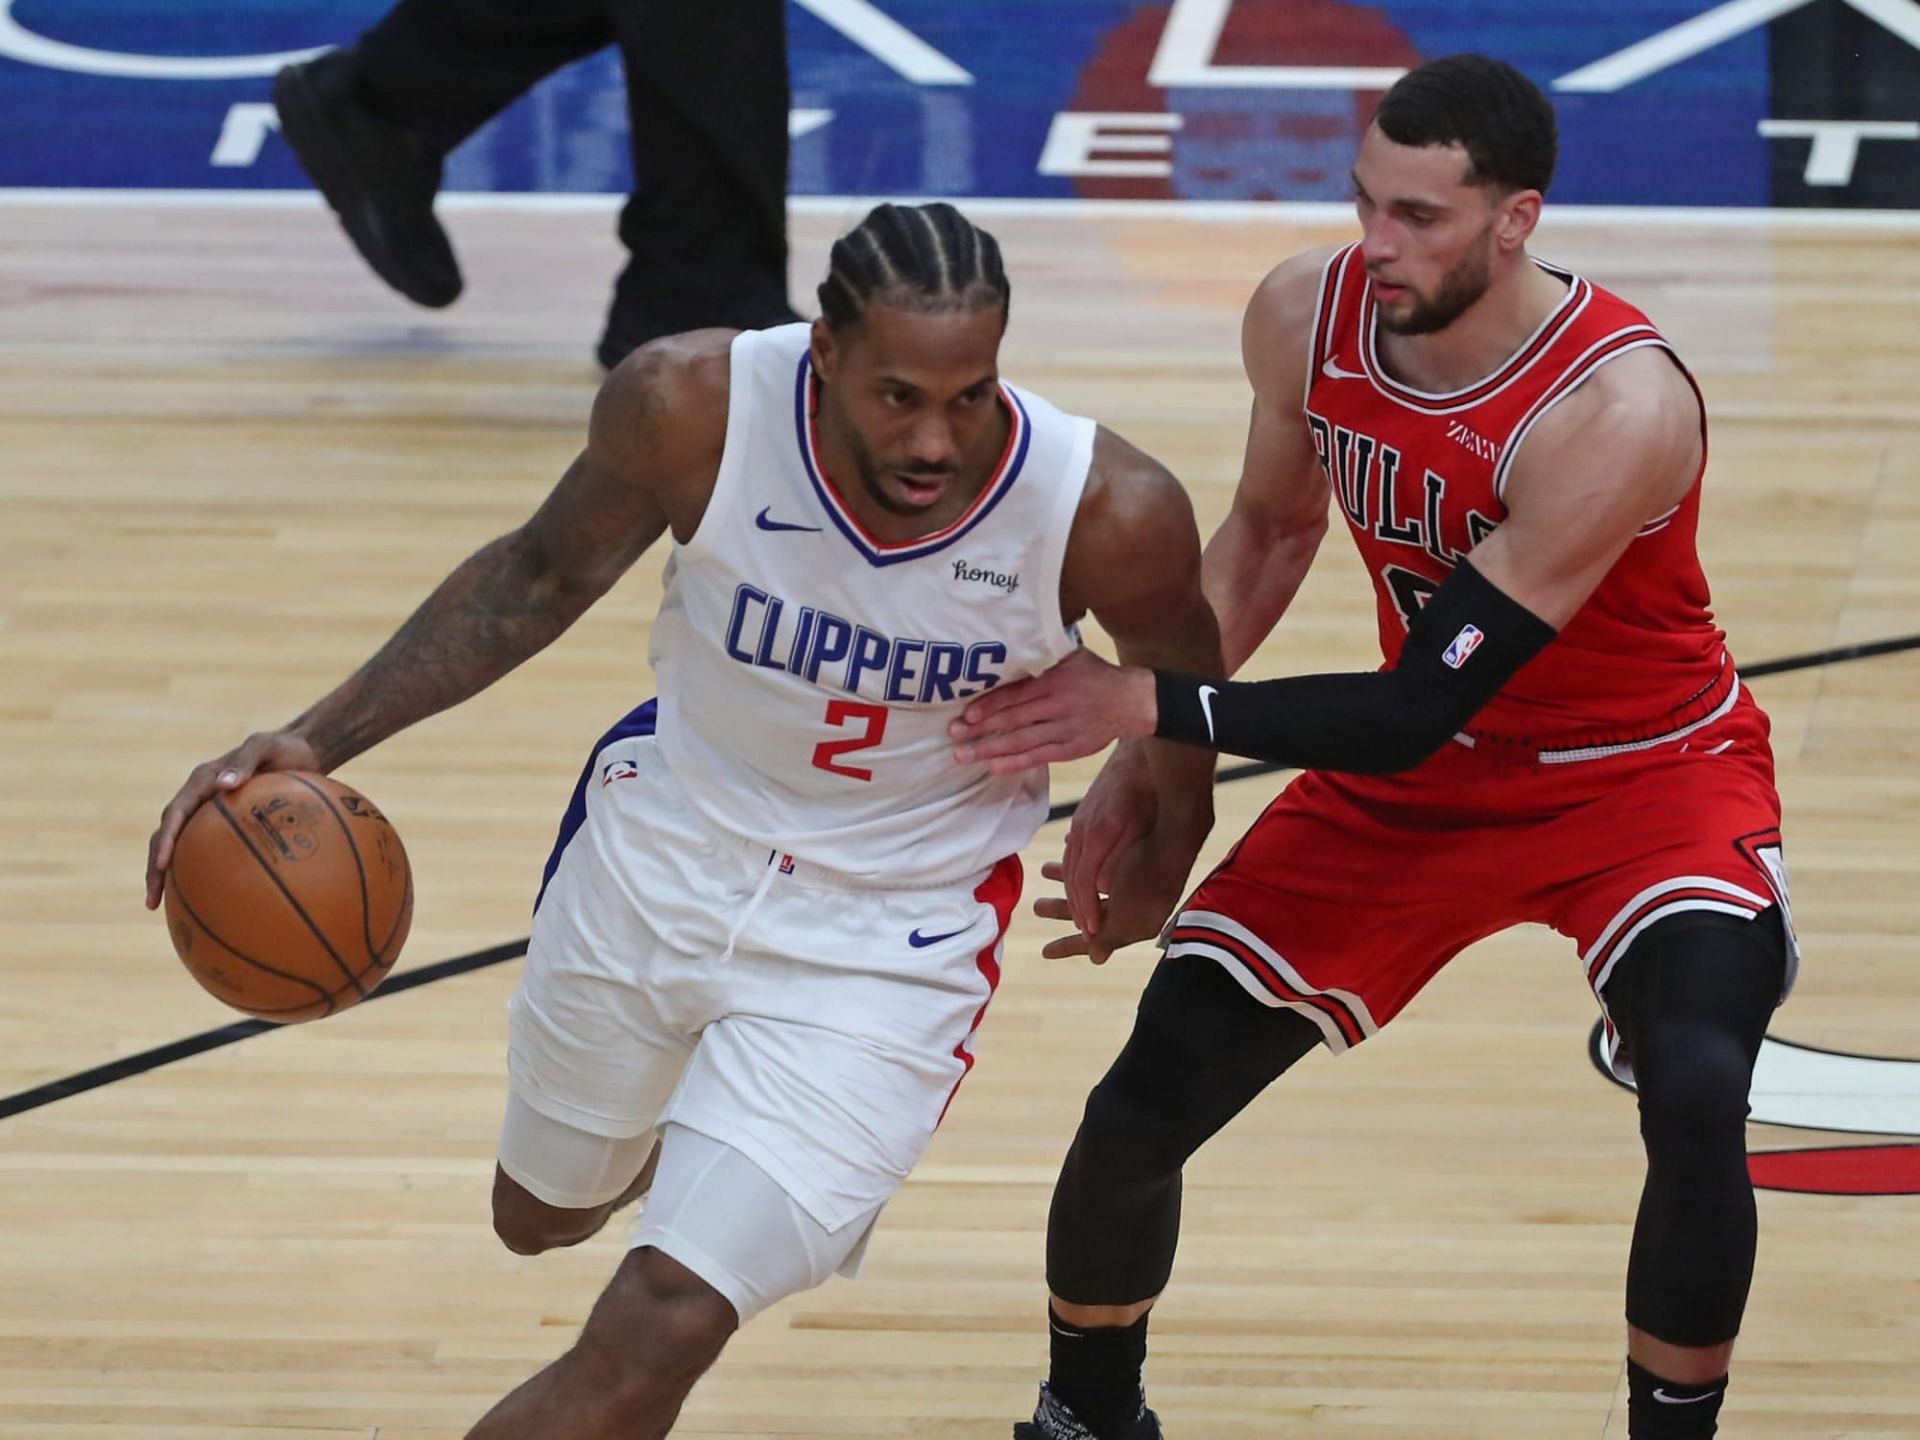 Kawhi Leonard is dealing with a facial contusion and will be probable tonight for the LA Clippers against the Chicago Bulls.